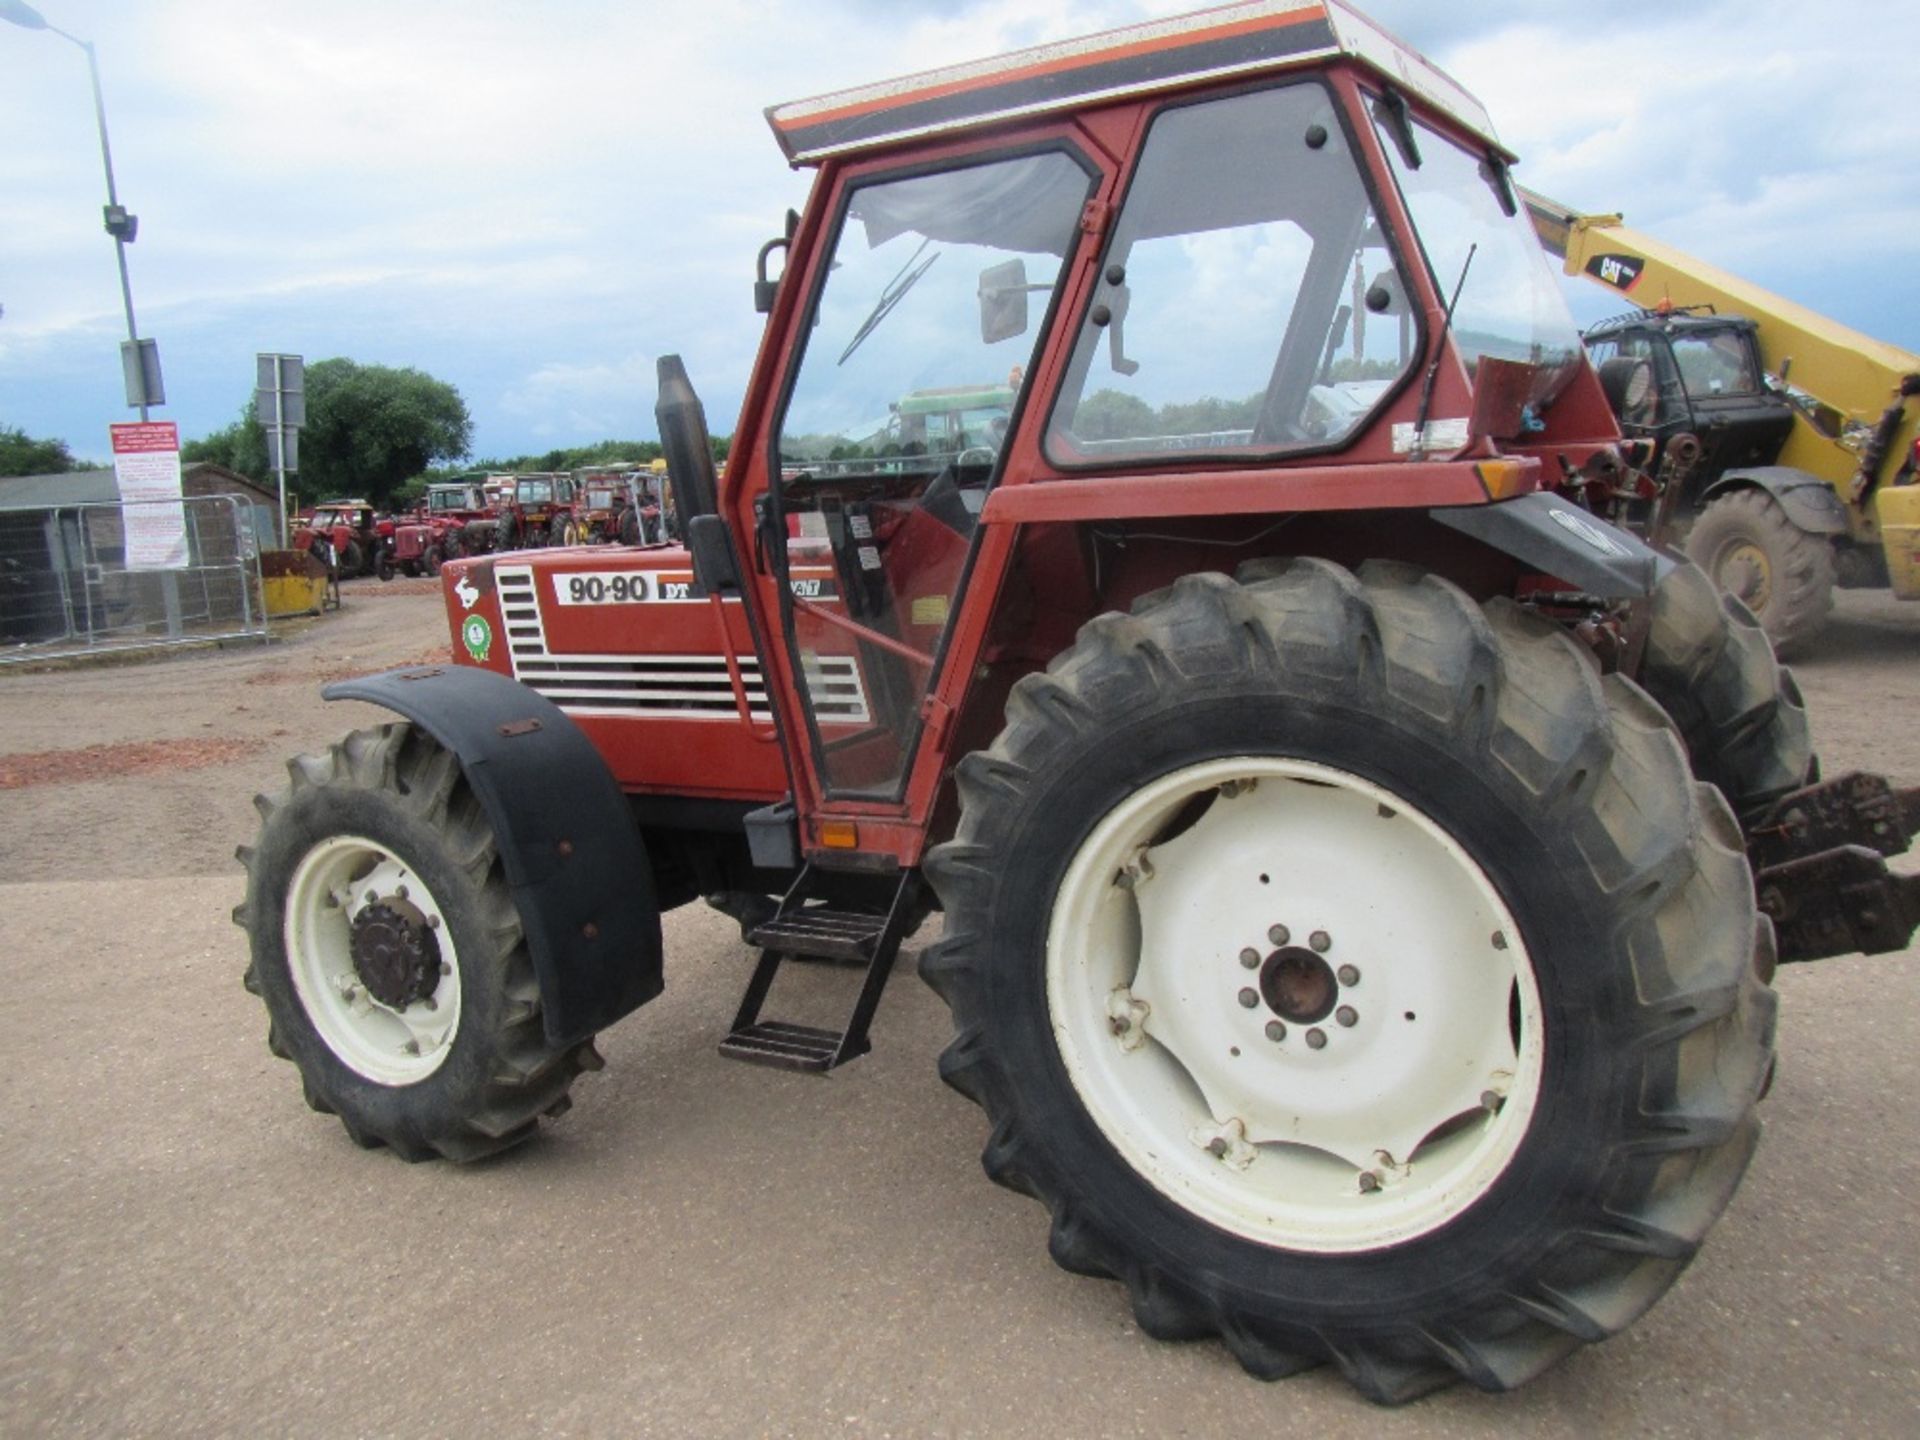 Fiat Tractor 90-90 DT 4wd Tractor. V5 will be supplied. Reg. No. F854 PHP Ser No 817899 - Image 9 of 16